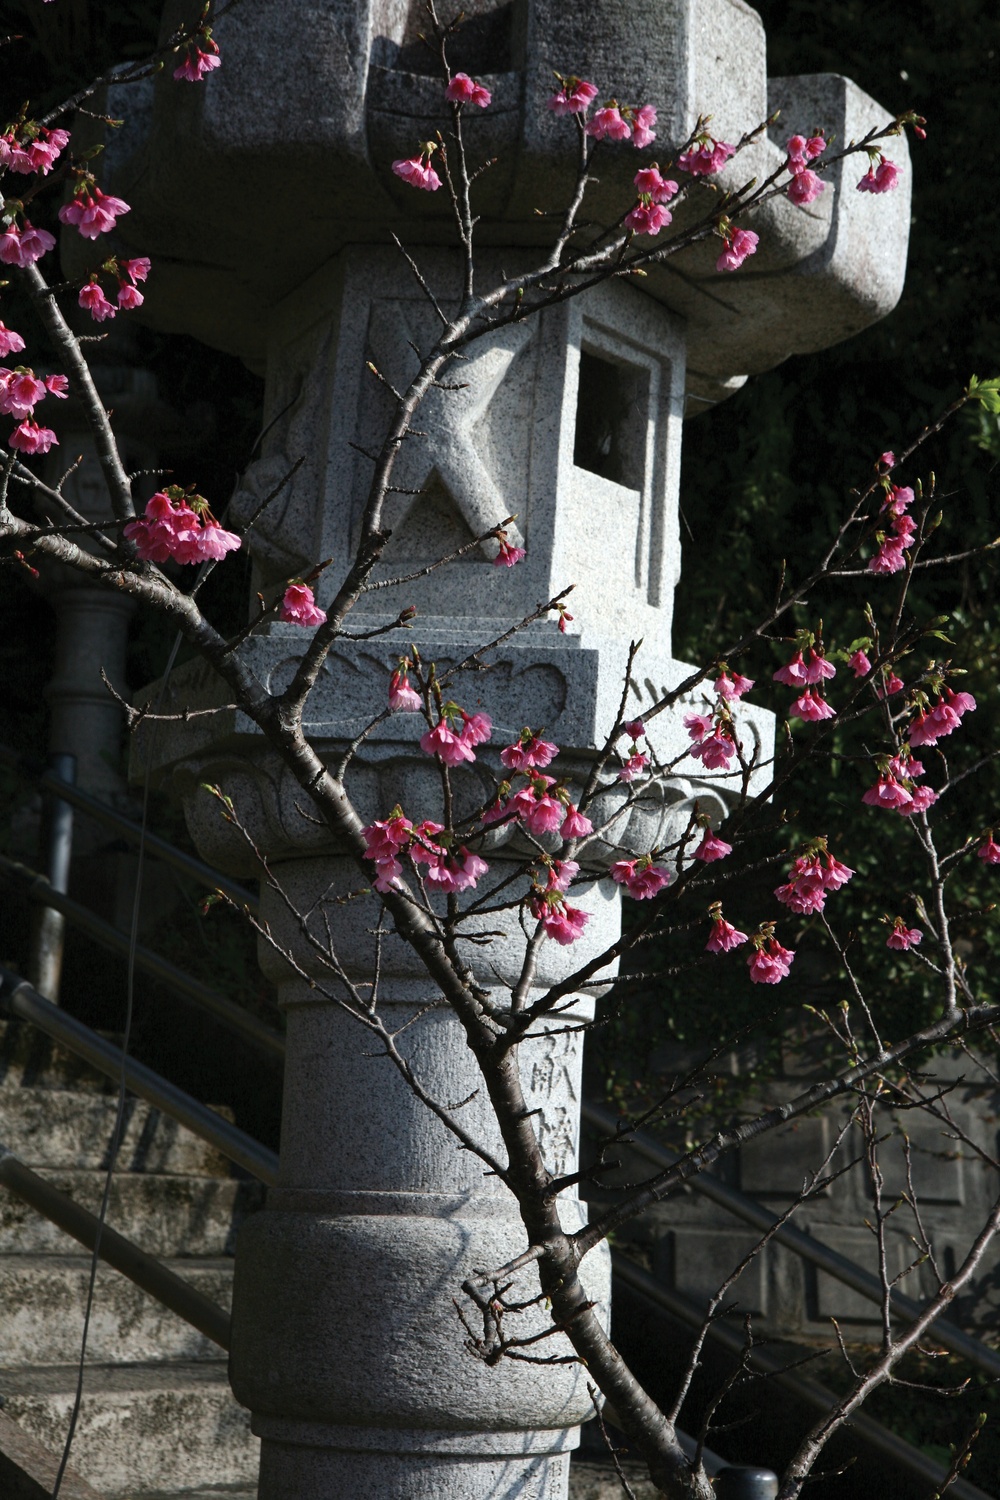 Okinawa blooms with cherry blossoms